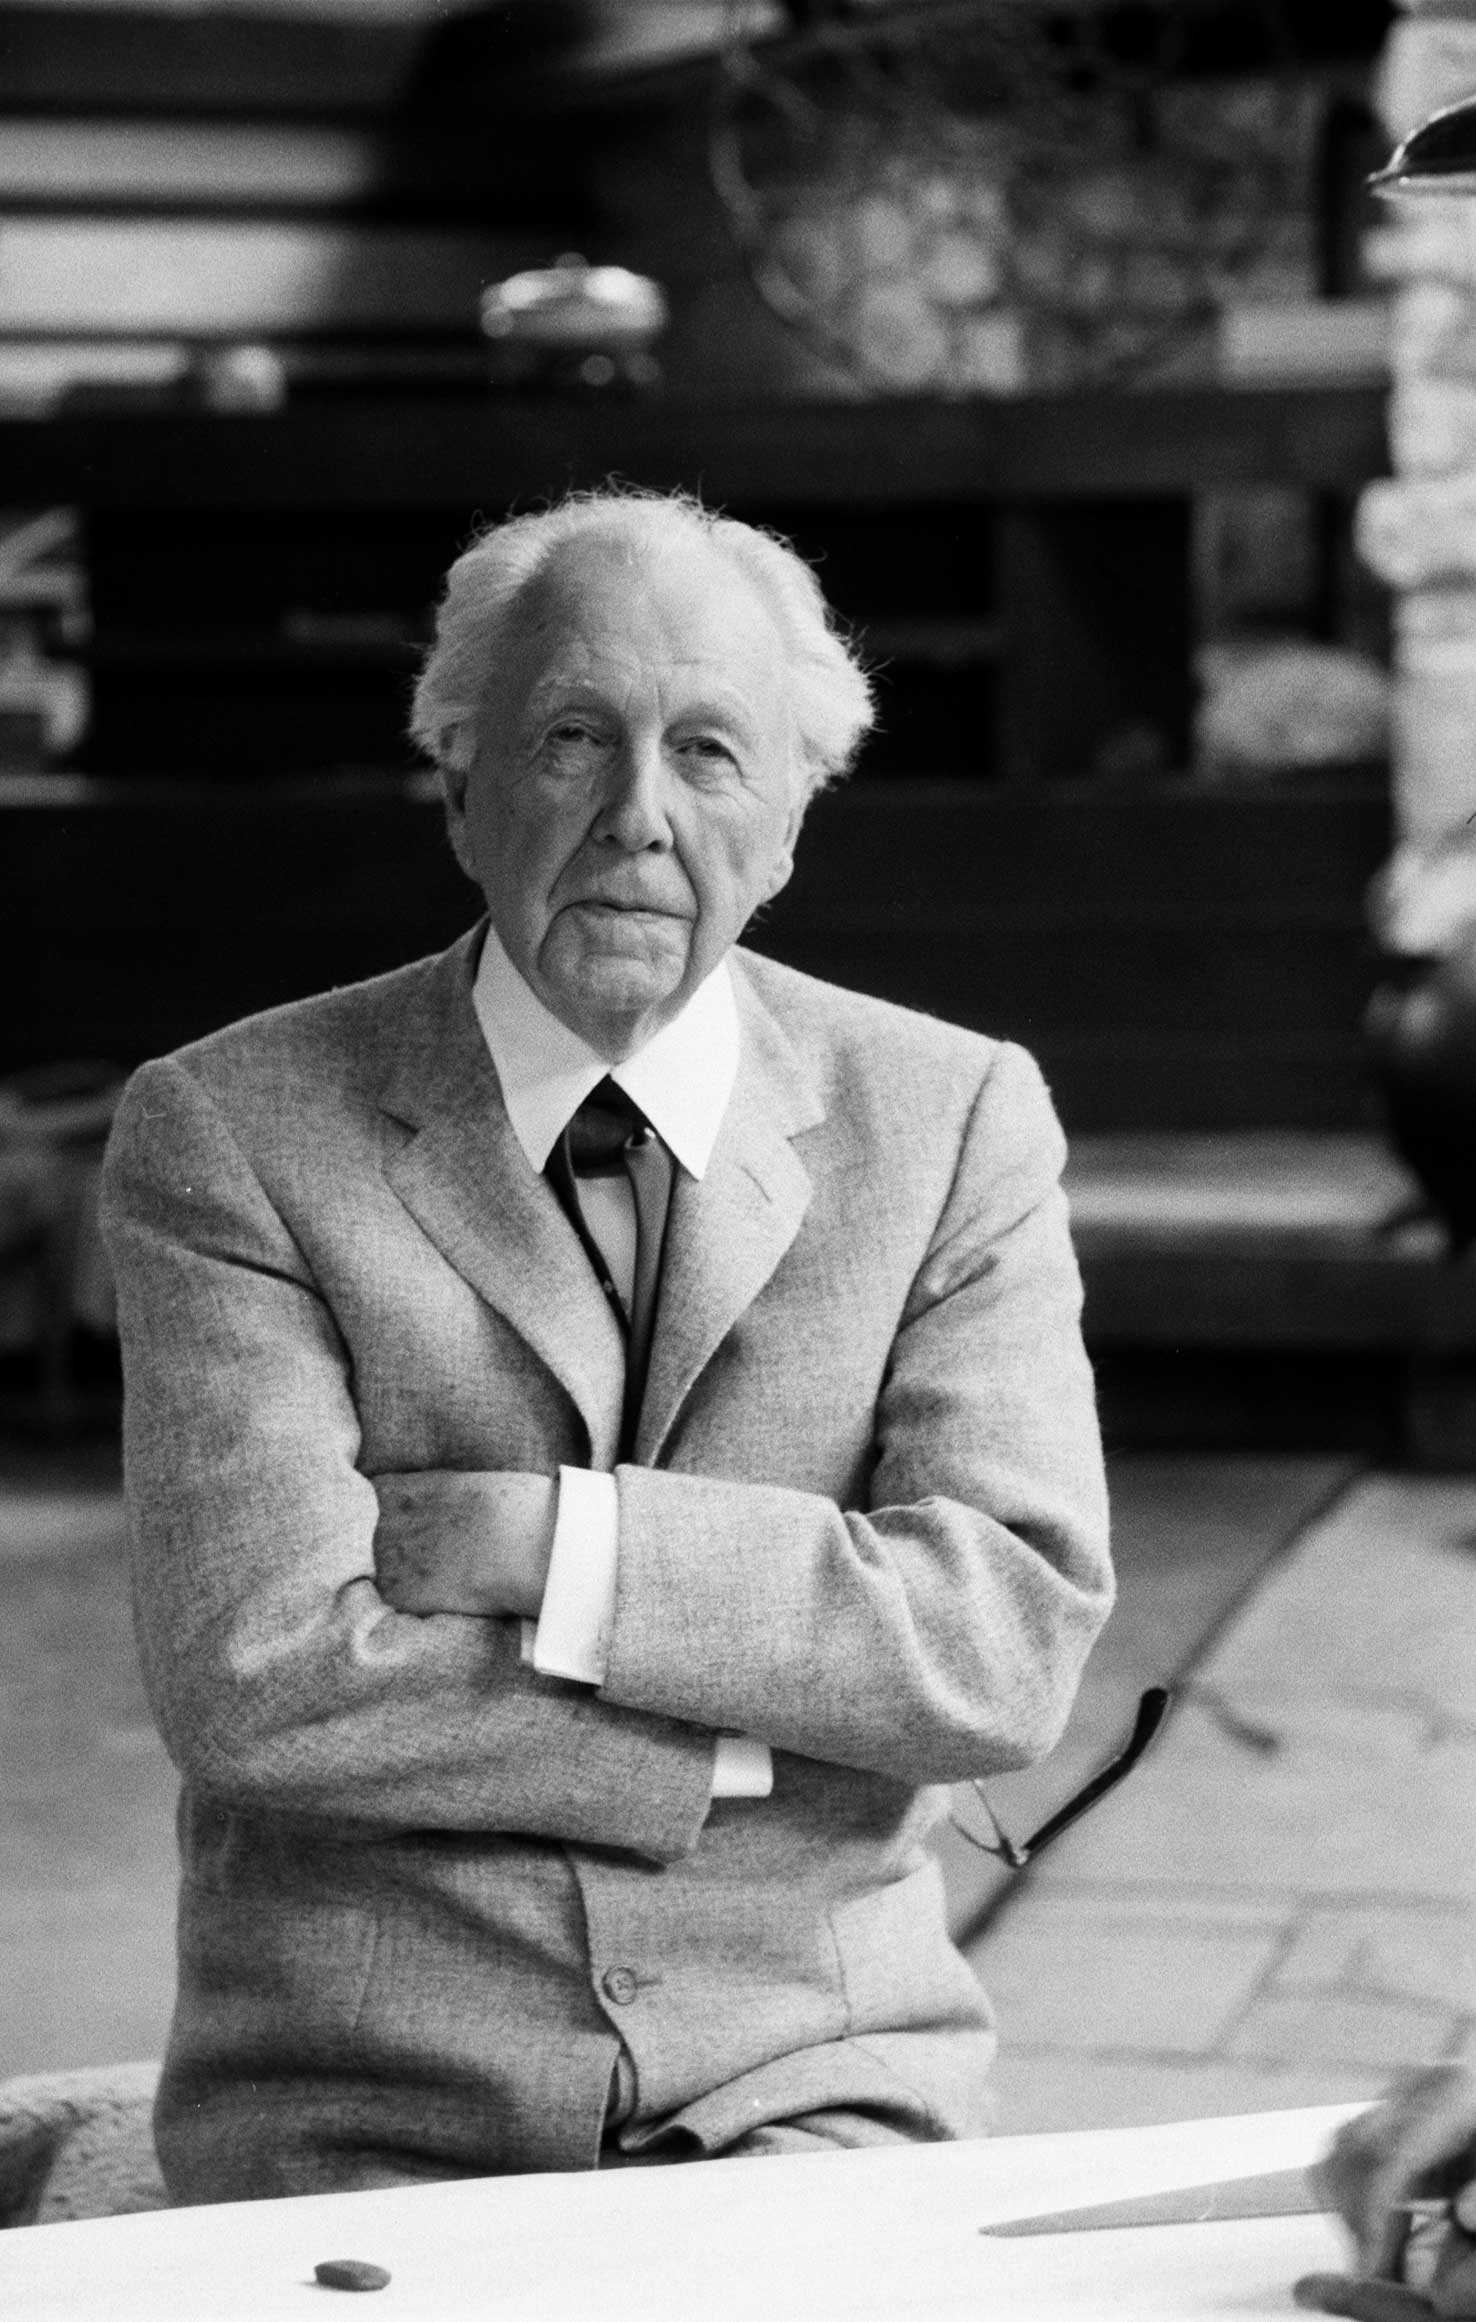 Frank Lloyd Wright 89, works 12-hour day running fellowship for aspiring architects, dances and swims, says: "The more I abused my physical resources, the more I had."